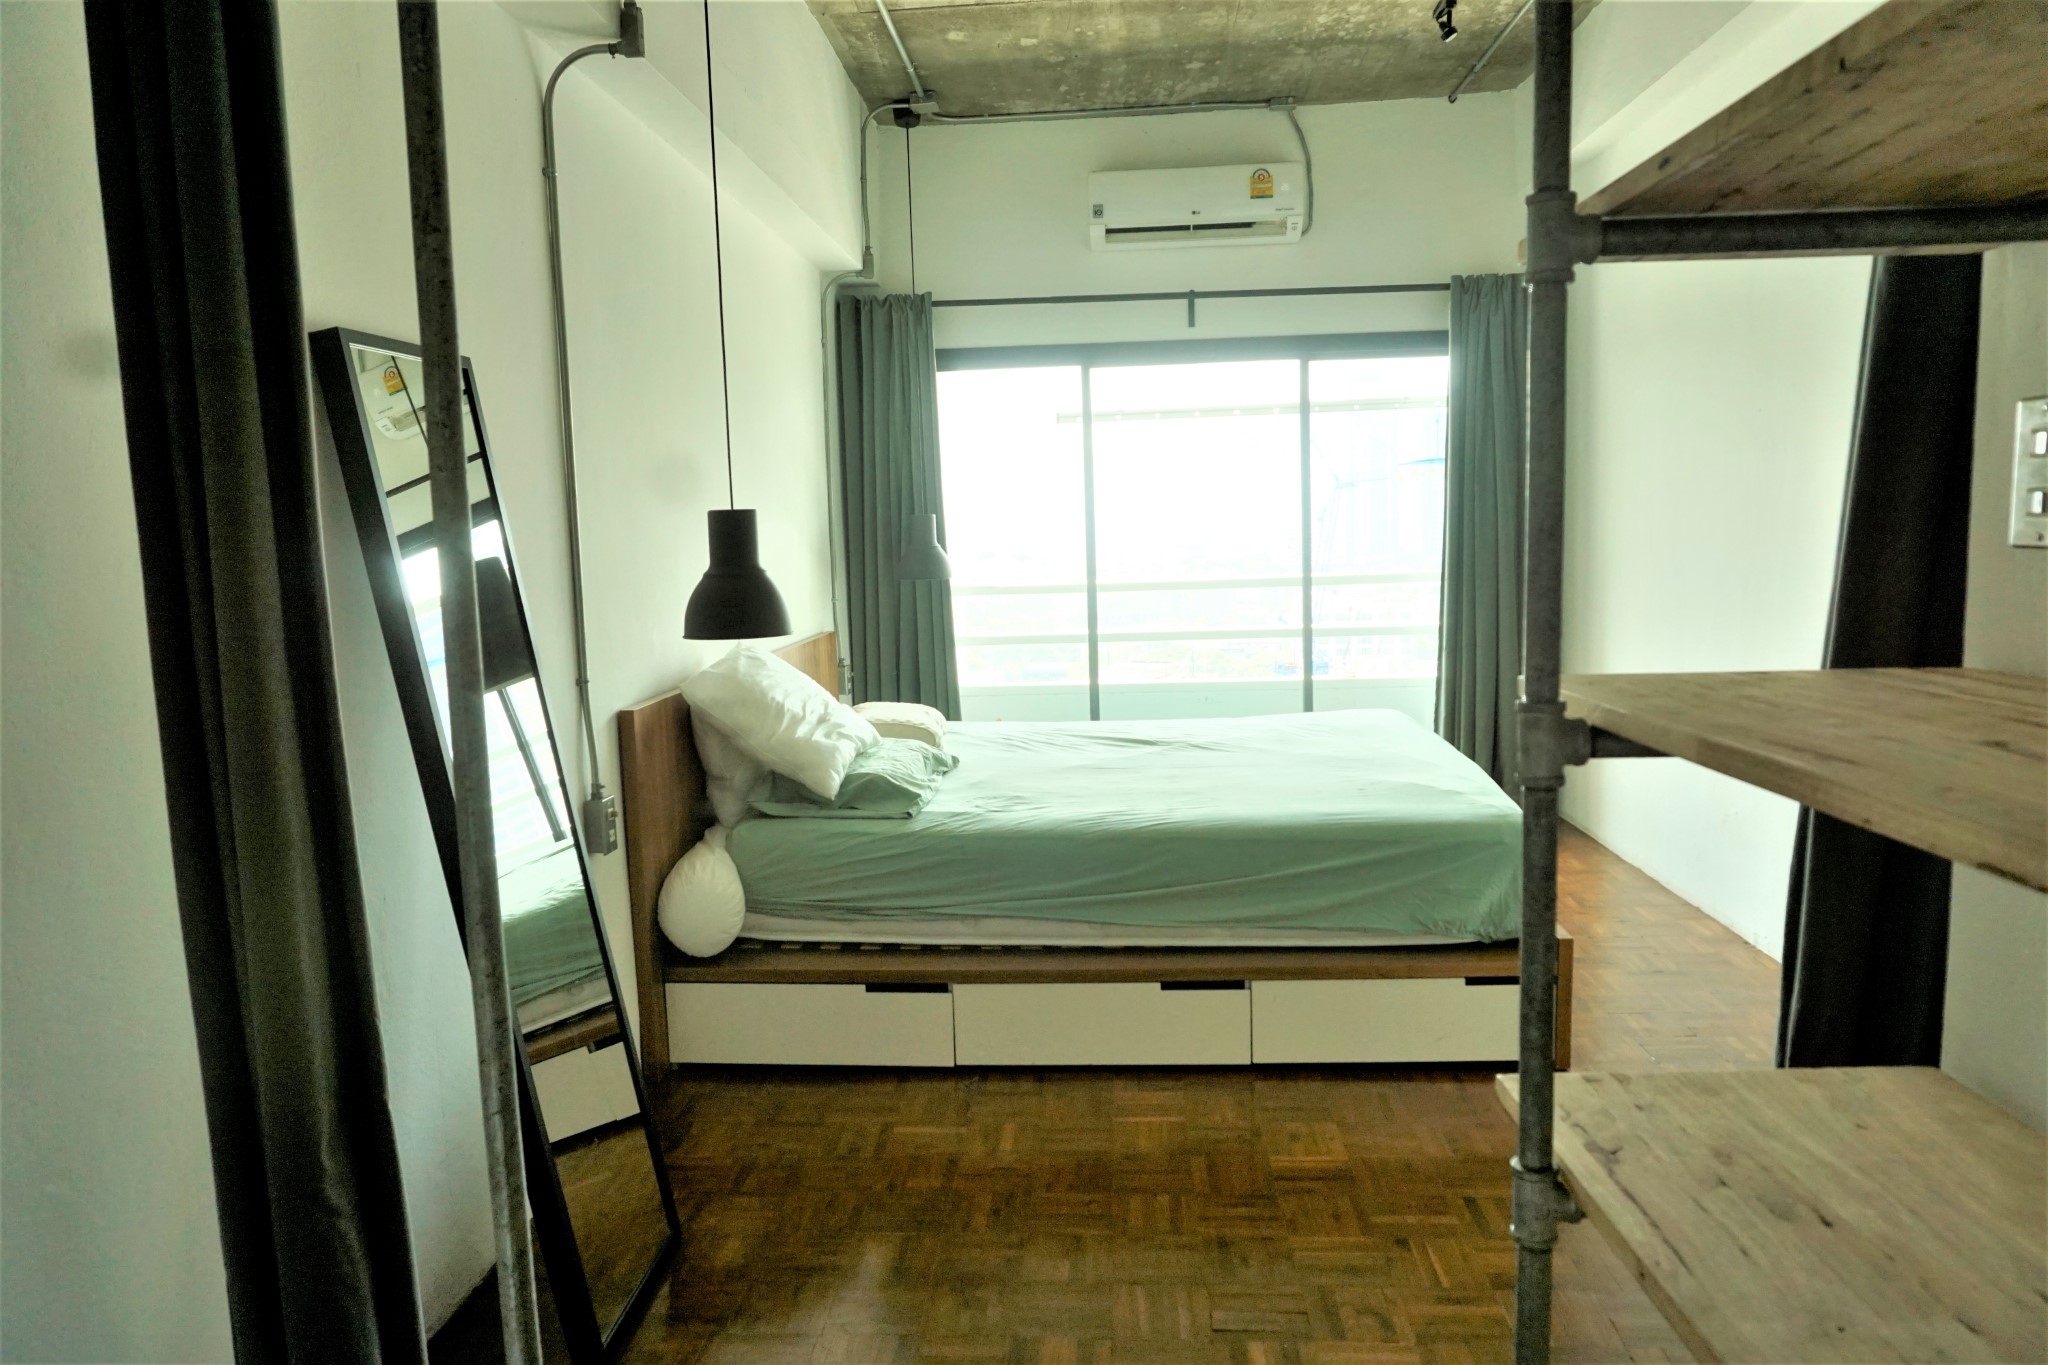 2 Bedrooms, 2 Bathrooms 94sqm size at Thonglor Tower For Rent 39K THB